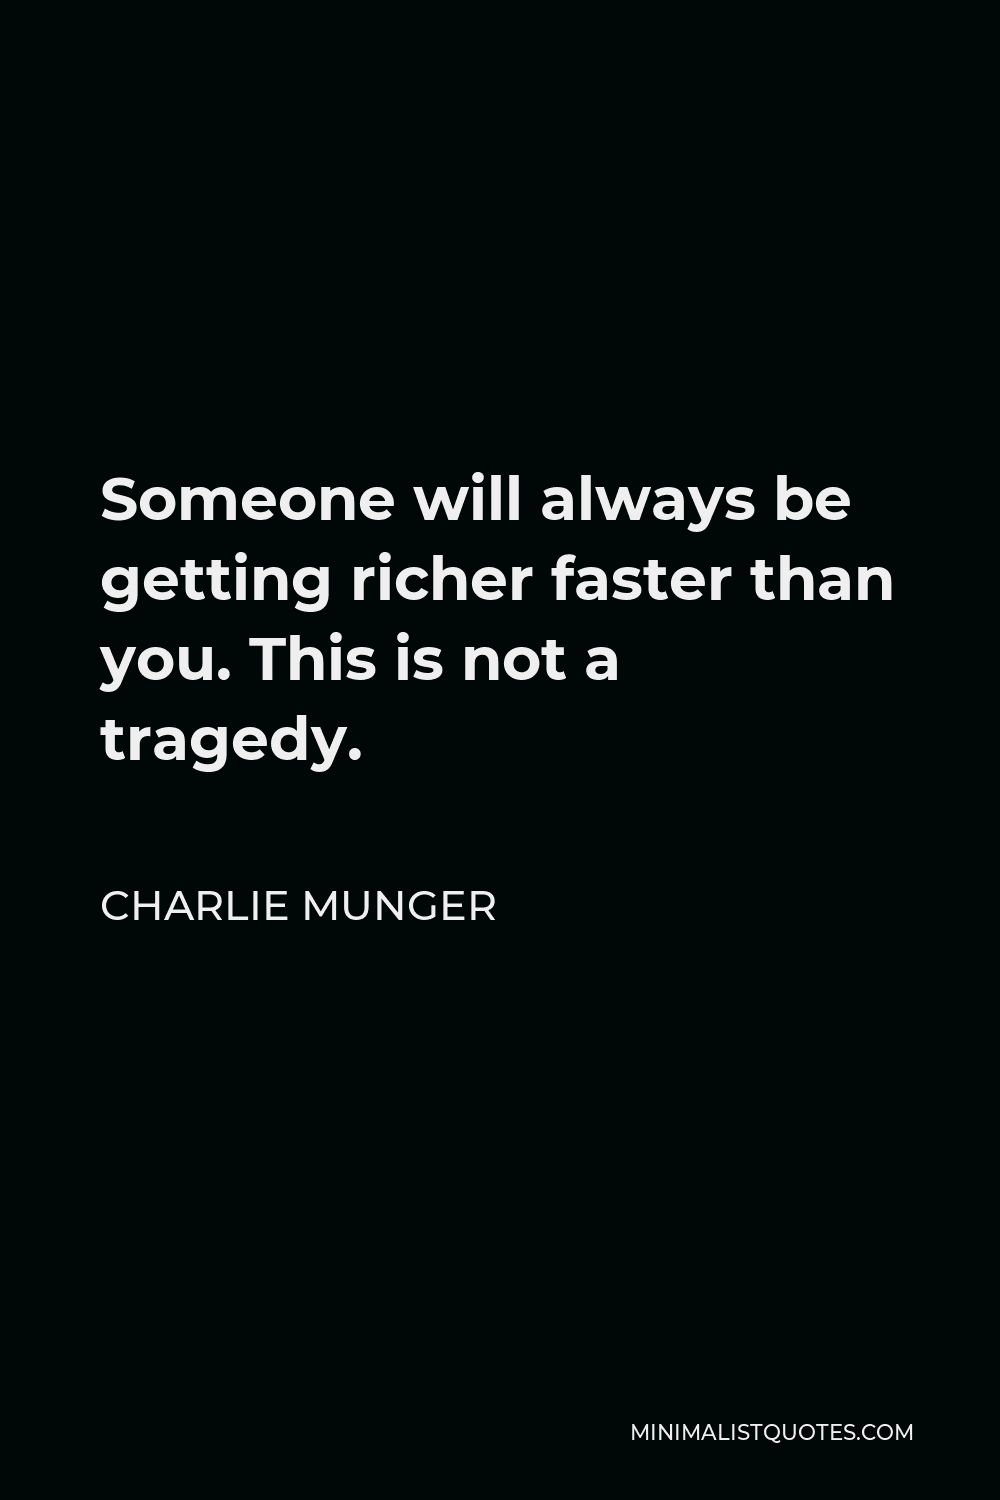 Charlie Munger Quote - Someone will always be getting richer faster than you. This is not a tragedy.